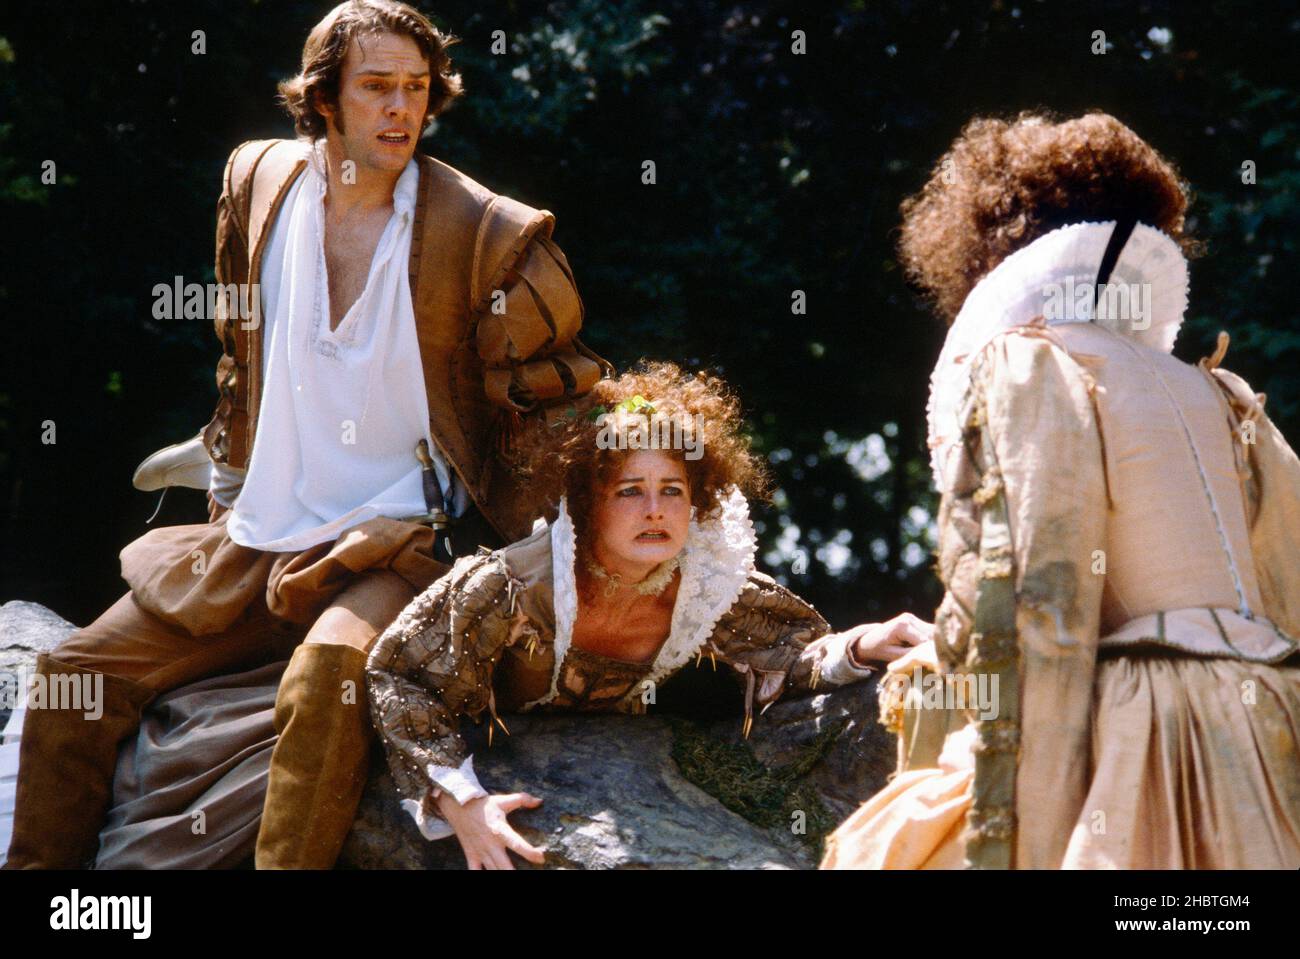 John Curry (Lysander), Abigail McKern (Hermia) in A MIDSUMMER NIGHT'S DREAM by Shakespeare at the Open Air Theatre, Regent’s Park, London NW1  21/06/1983  design: Tim Goodchild  director: Christopher Biggins Stock Photo